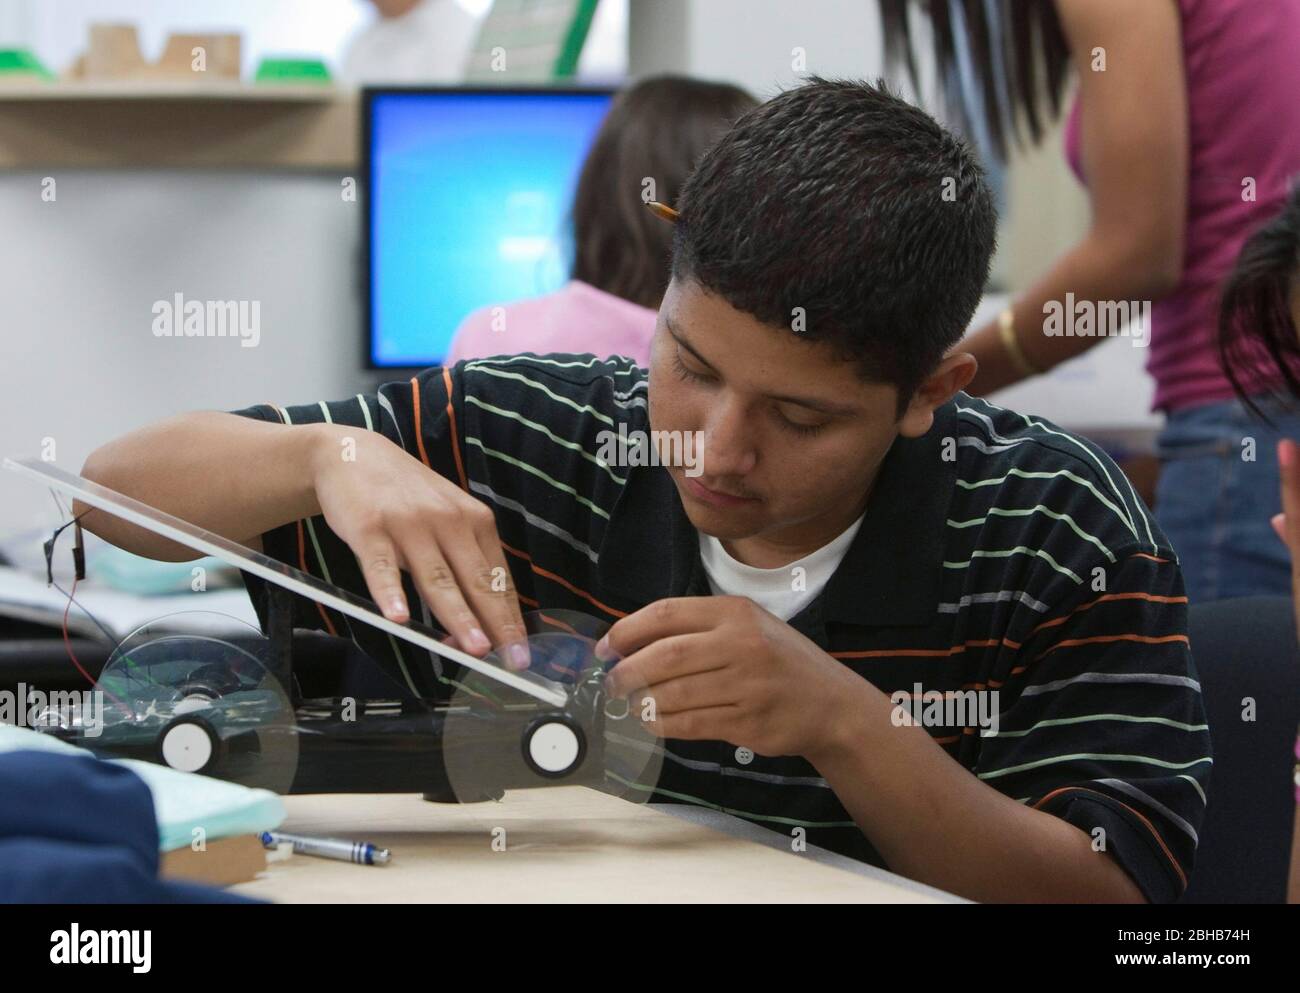 Manor Texas USA, May 12 2022: Student works to construct model solar car as part of class project at Manor New Tech High School, an innovative public school that centers on project-based learning in TSTEM (Technology Science Engineering Mathematics) curriculum.  ©Bob Daemmrich Stock Photo